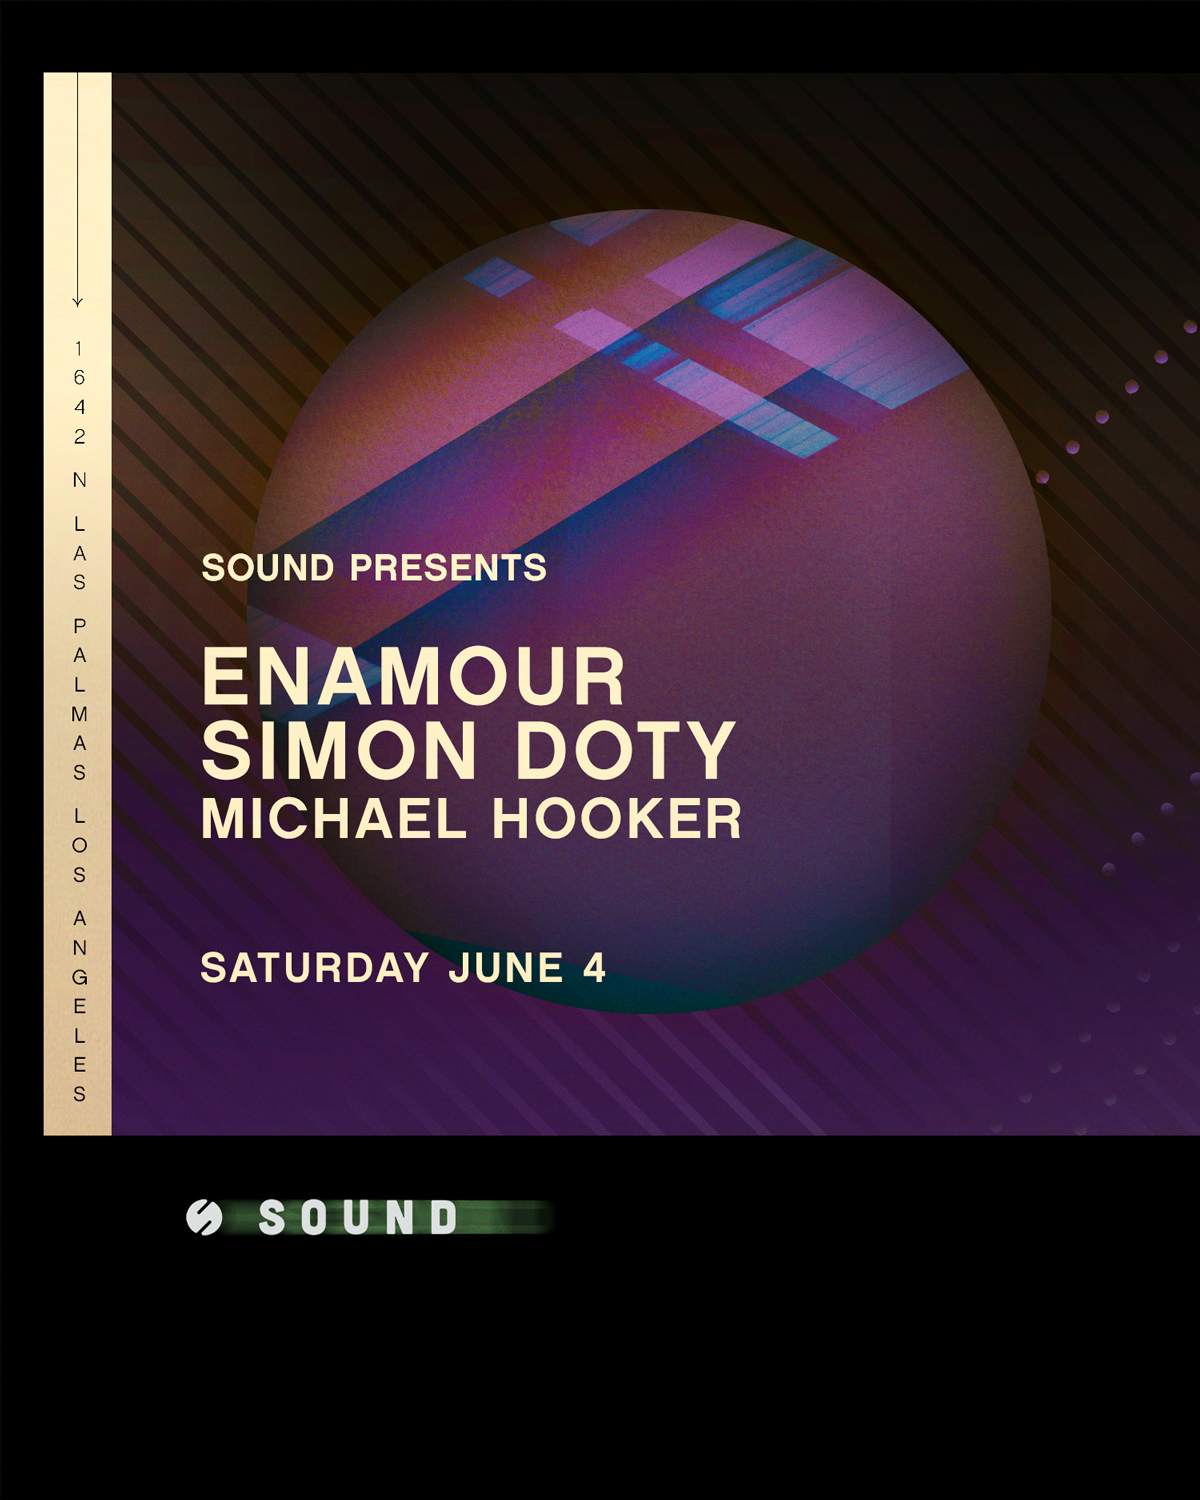 Sound presents Enamour and Simon Doty with support by Michael Hooker - Página frontal